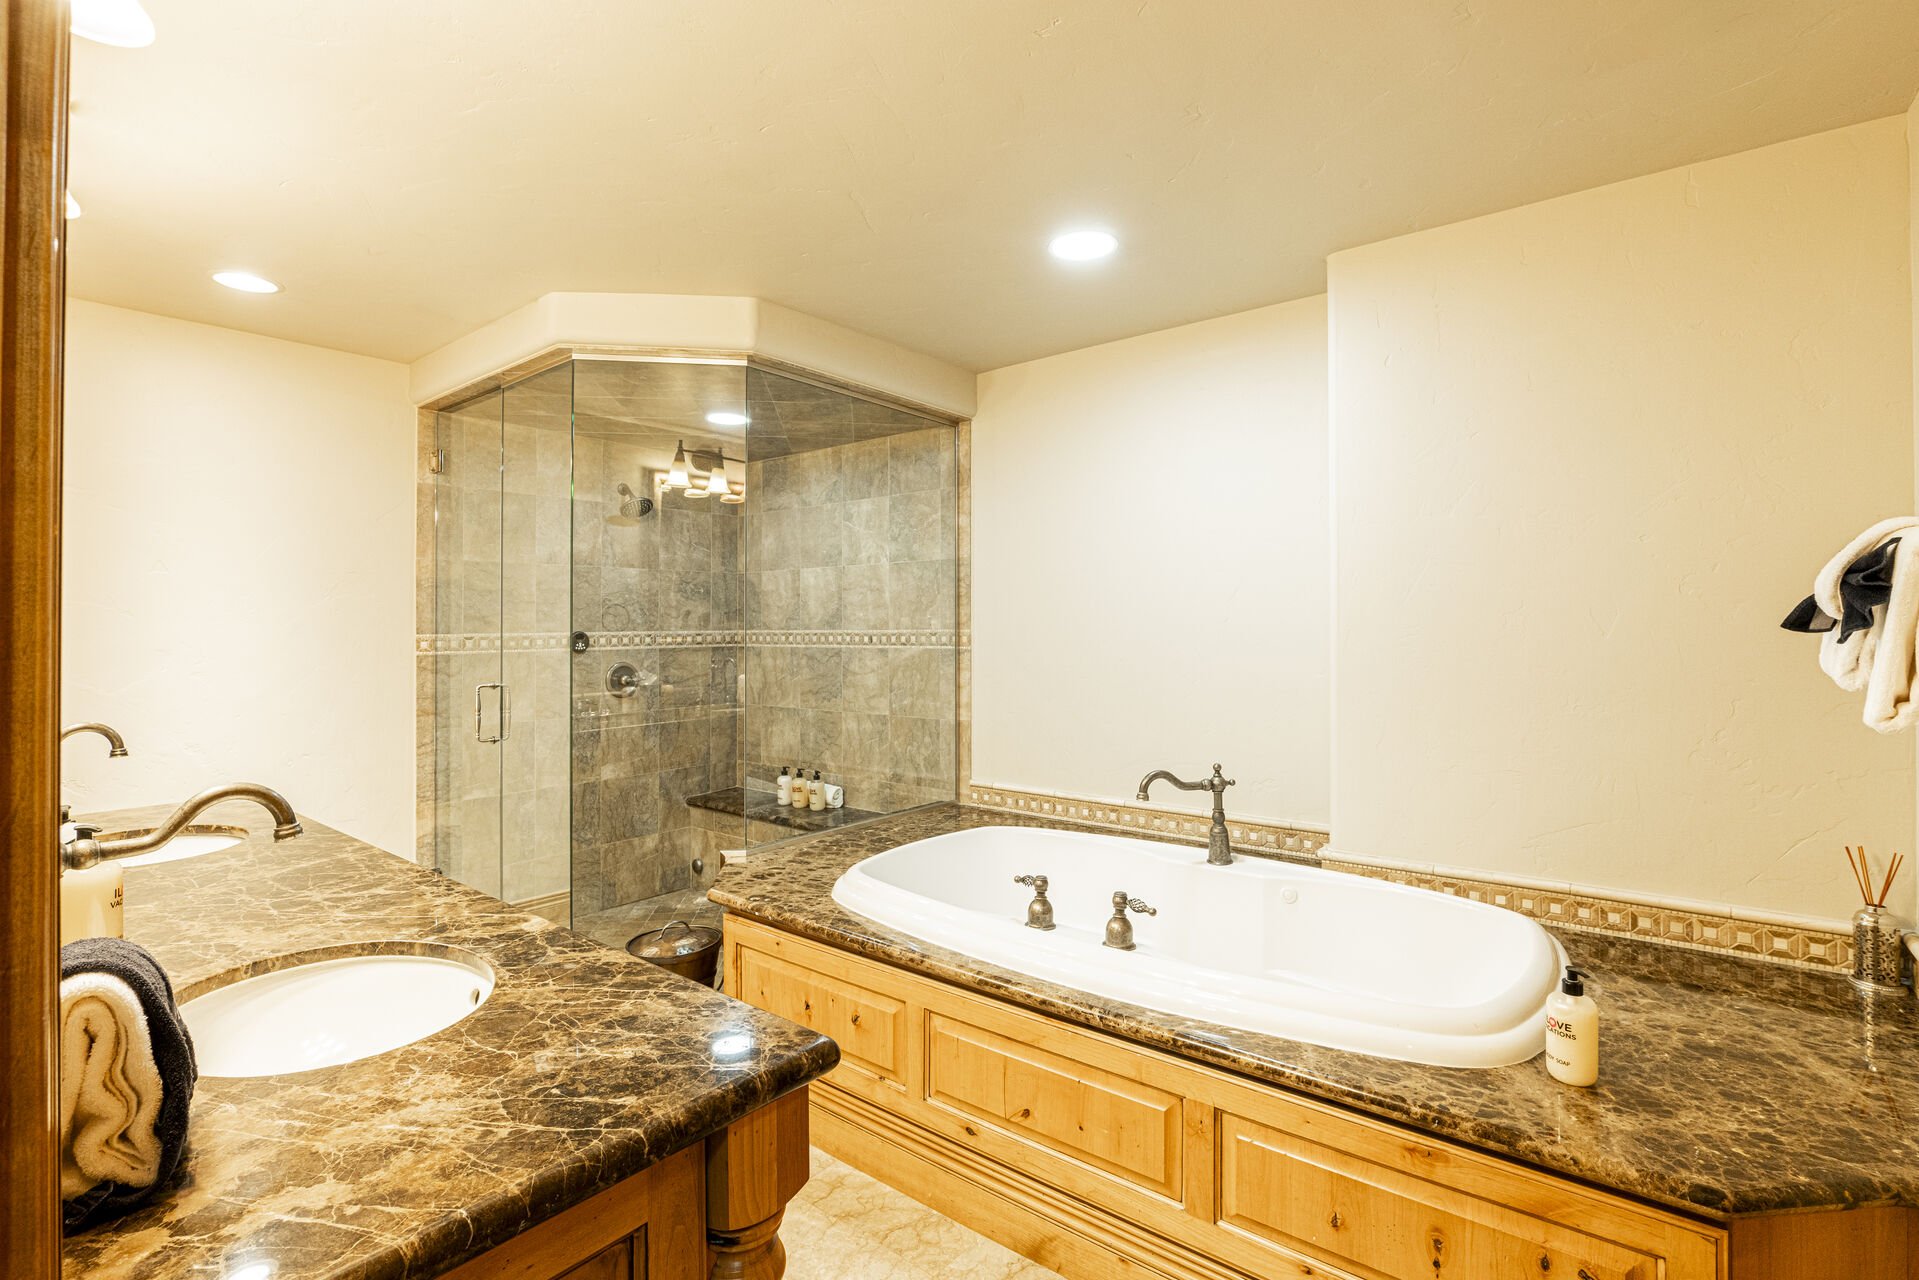 Grand Master Bath with a Jetted Tub, Walk-in Closet and Water Closet